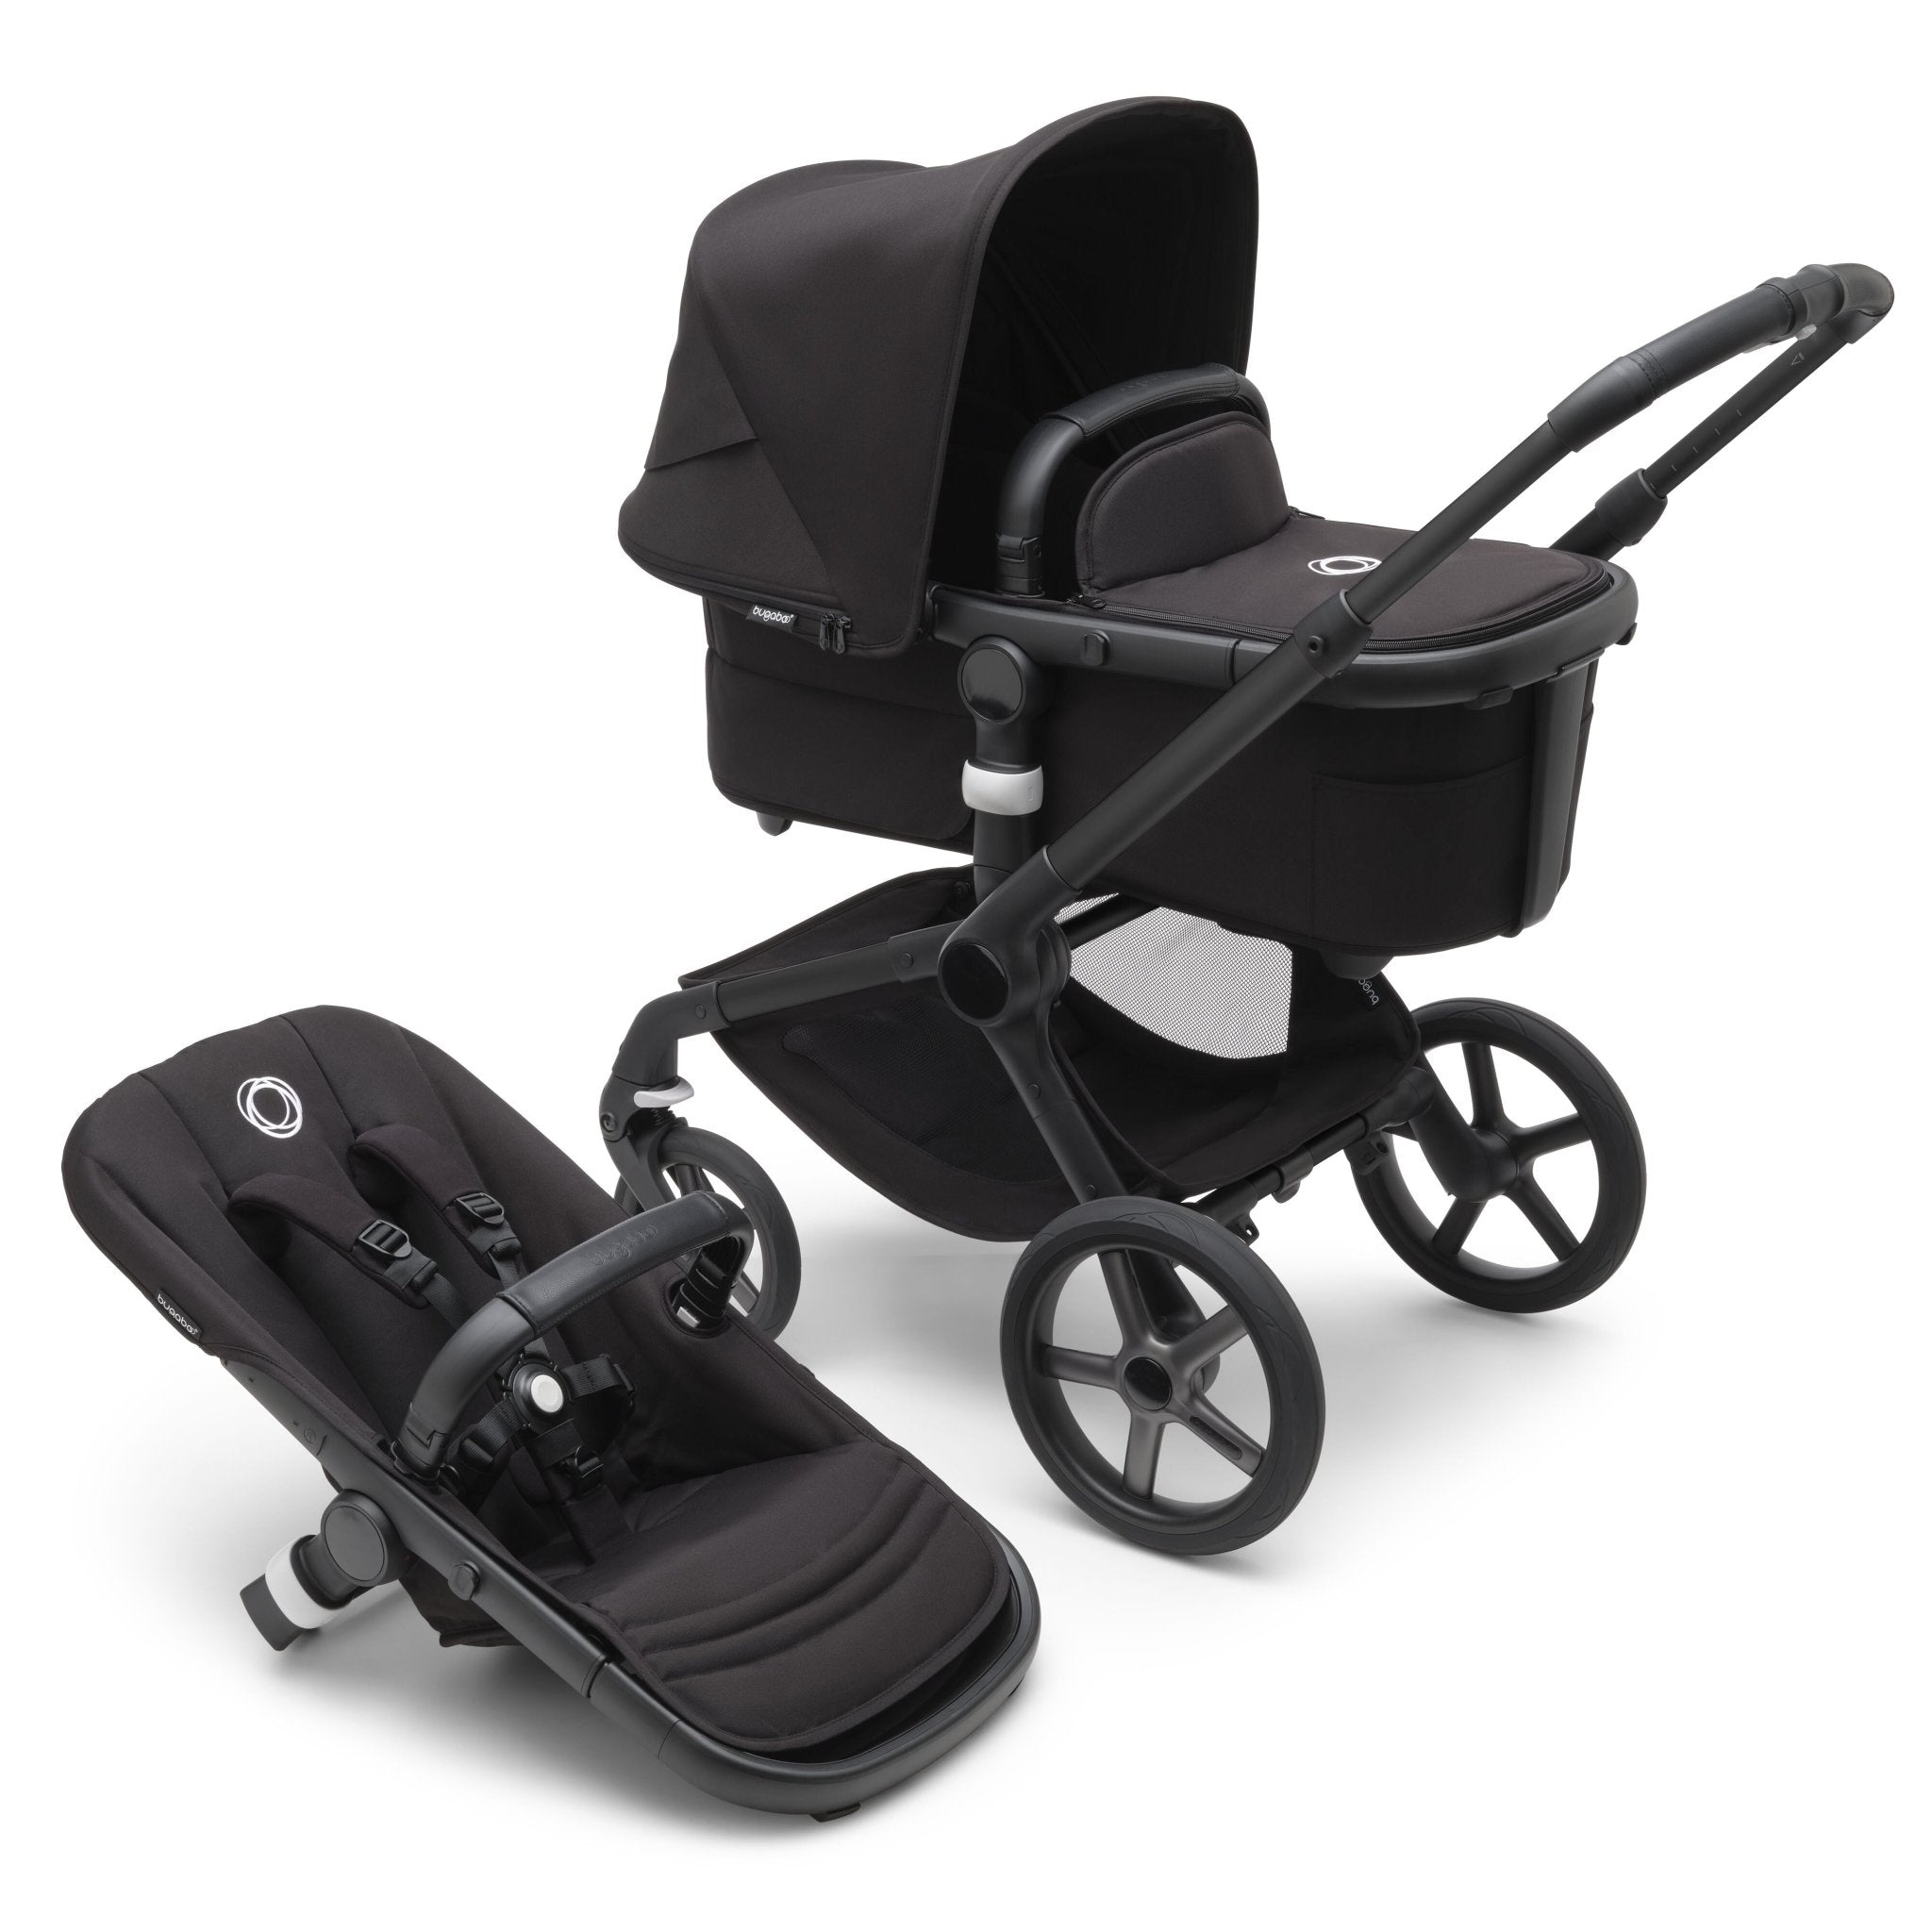 Bugaboo Fox 5 Complete Stroller - ANB Baby -8717447168836$1000 - $2000